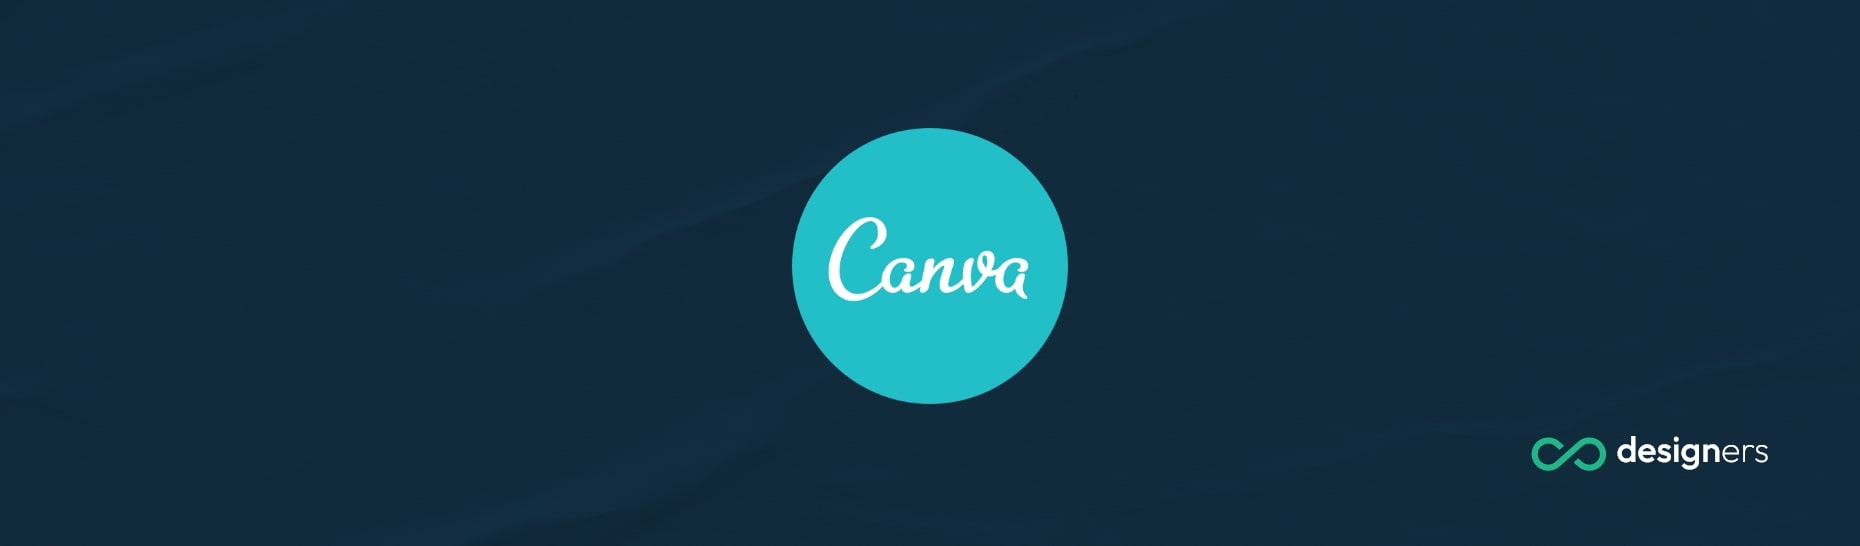 Does Canva Work in China?